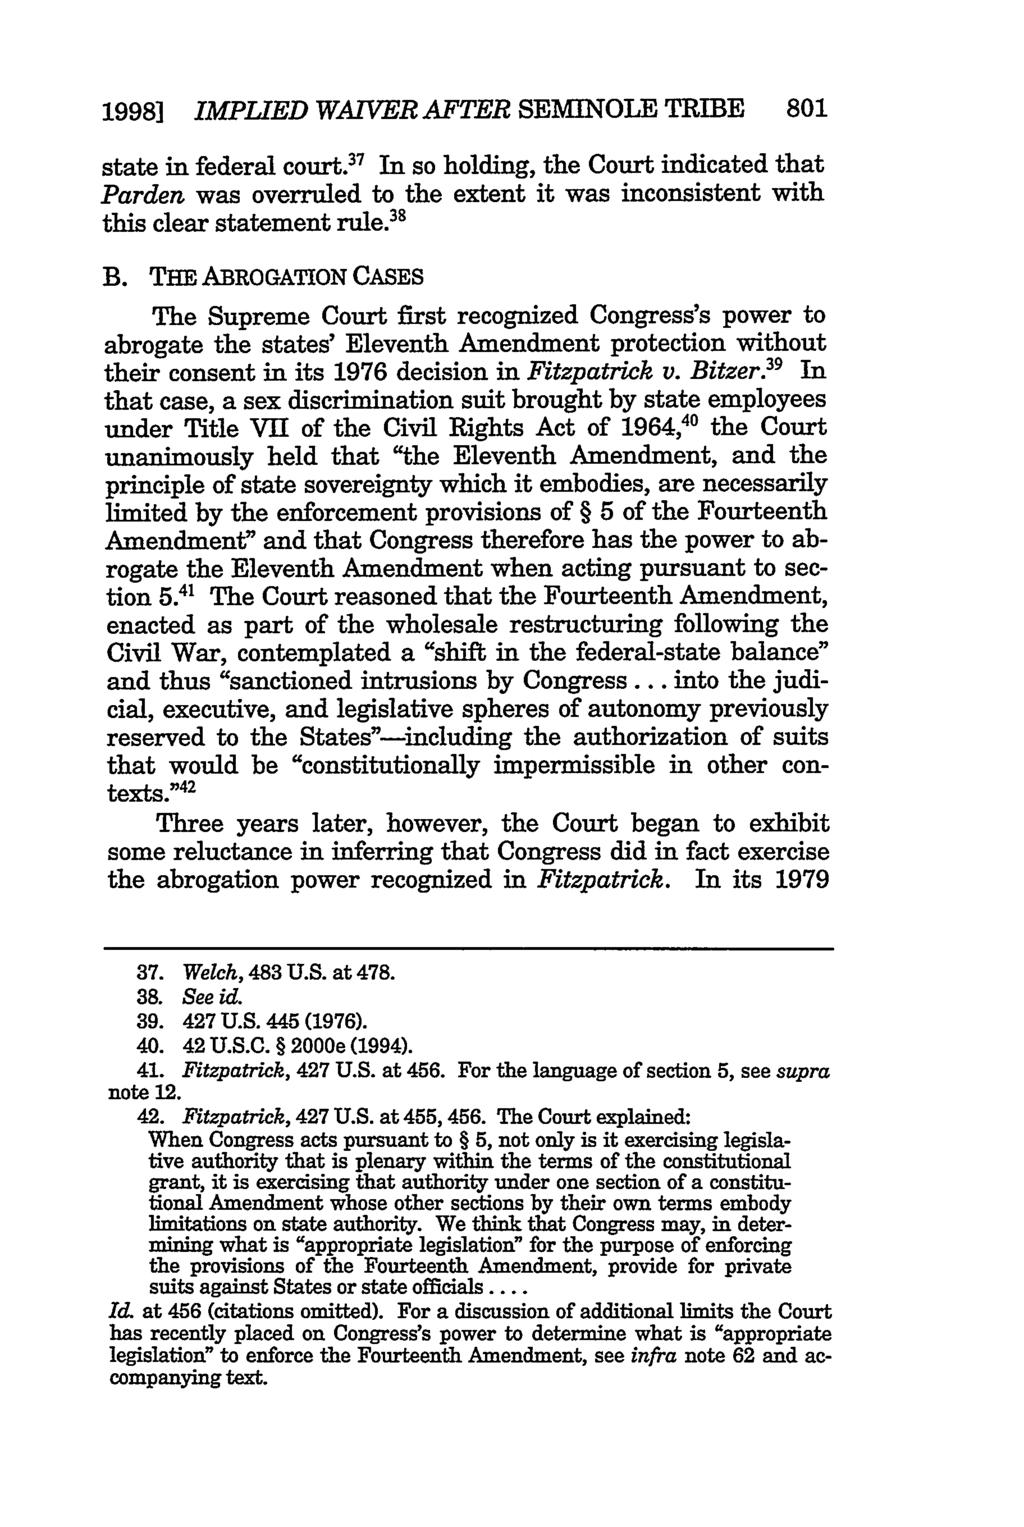 1998] IMPLIED WAIVER AFTER SEMINOLE TRIBE 801 state in federal court. In so holding, the Court indicated that Parden was overruled to the extent it was inconsistent with this clear statement rule.